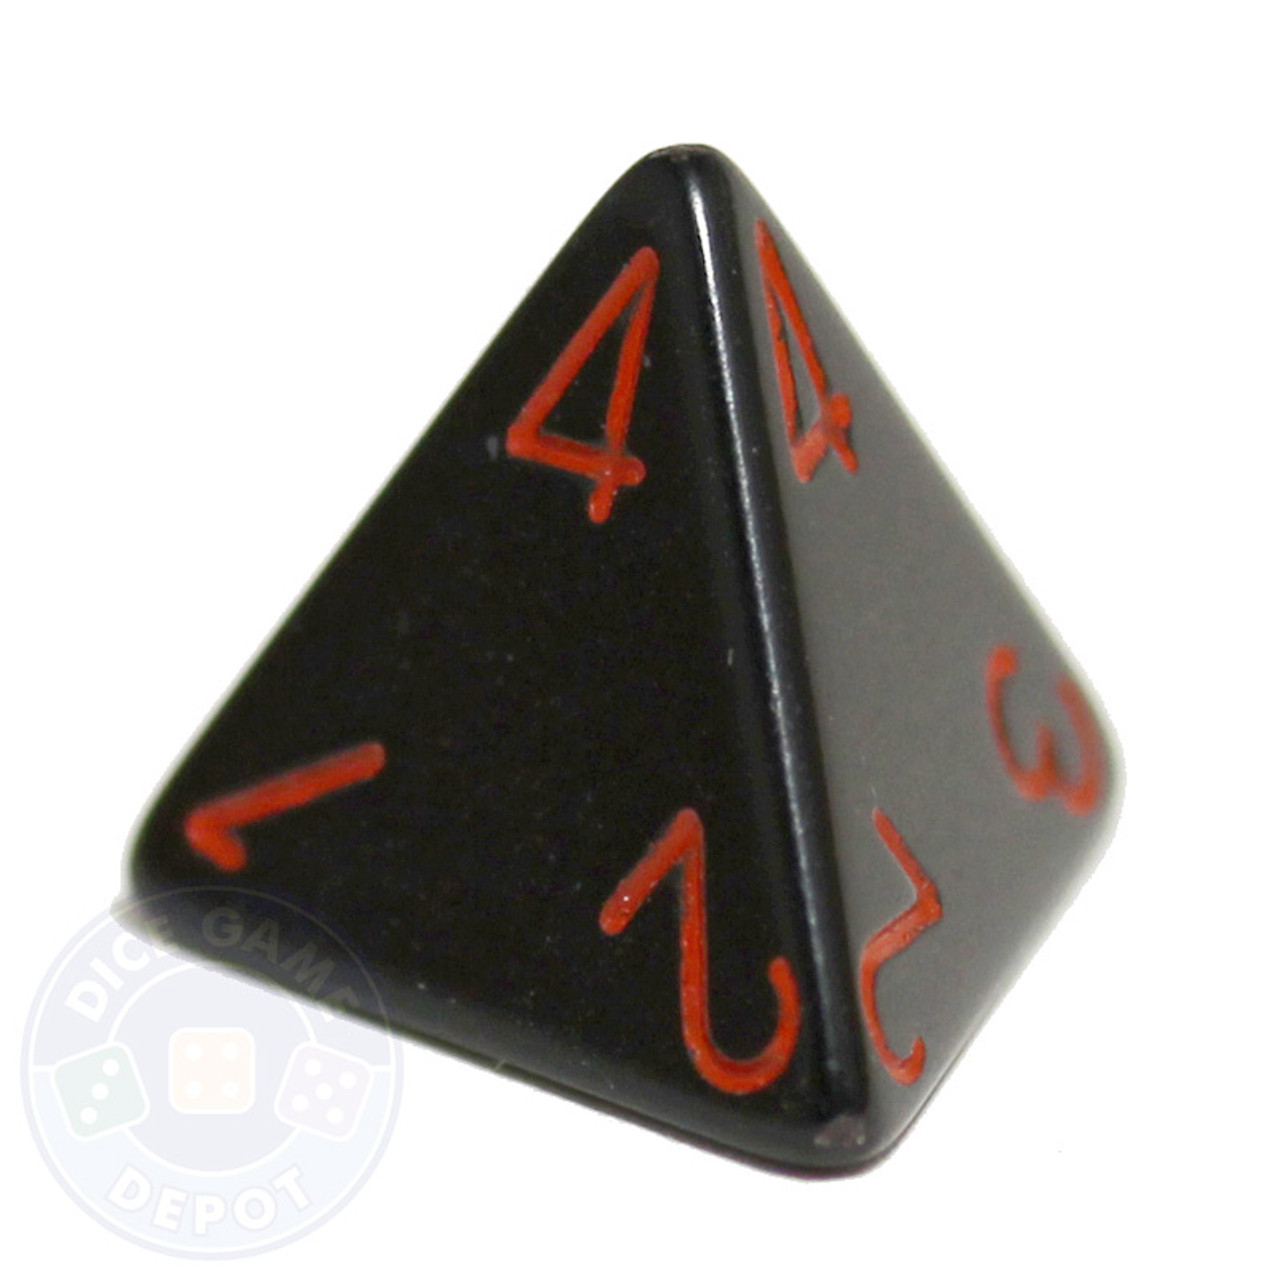 Pearlized Four-Sided d4 Dice Singles